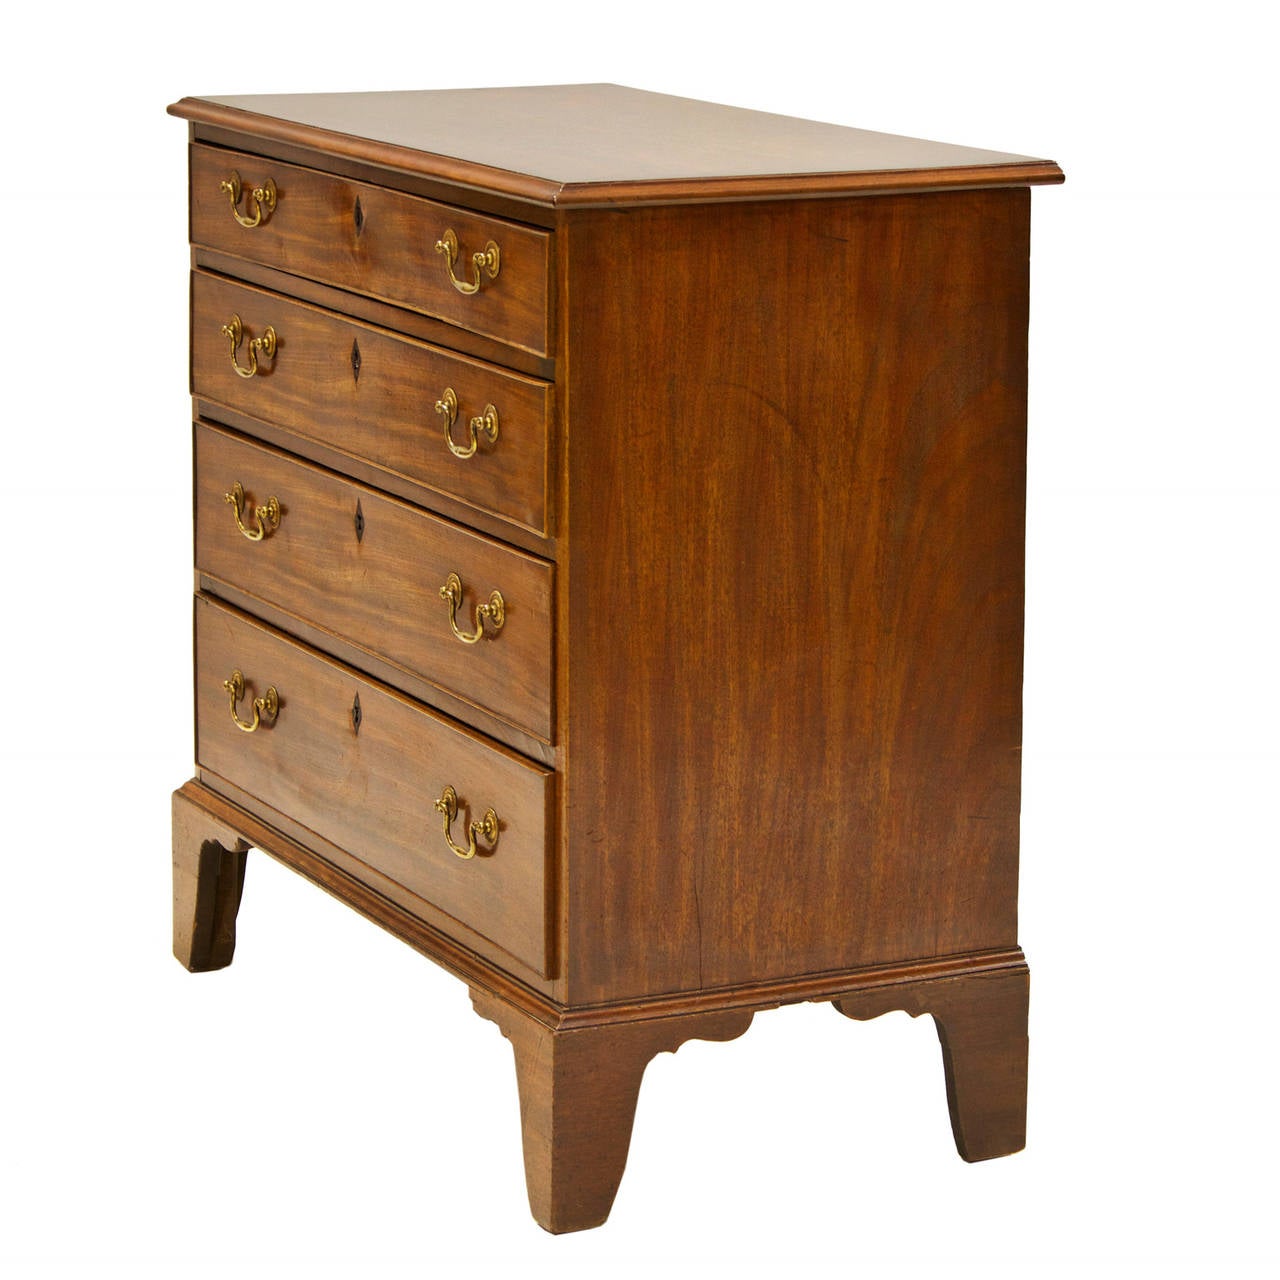 A fine 19th century mahogany chest of graduated drawers. There are four functional drawers with brass hardware. The escutcheons have been replaced due to import laws. These were discarded in Europe by the individual. The chest rest upon bracket